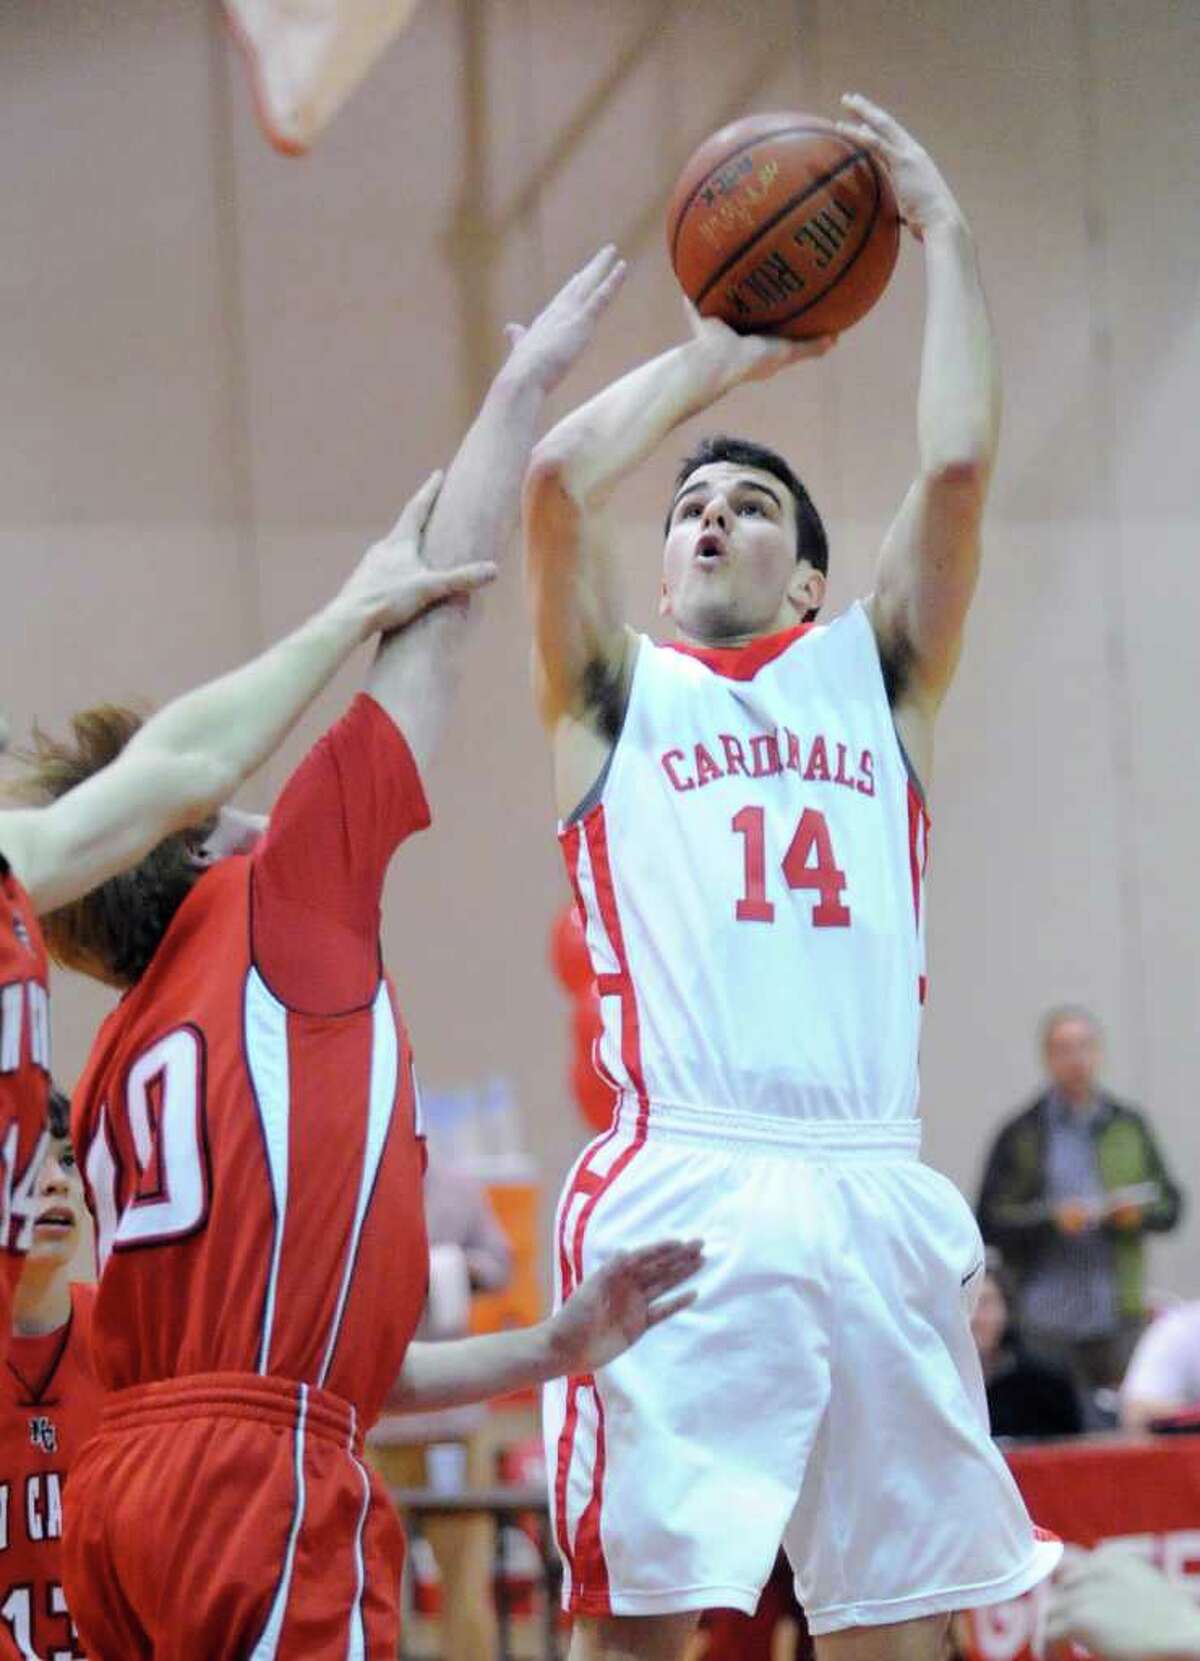 At right, Alejandro Rodriguez # 14 of Greenwich High School hits on a short jumper during boys high school basketball between Greenwich High School and New Canaan High School at Greenwich, Tuesday night, Feb. 7, 2012.